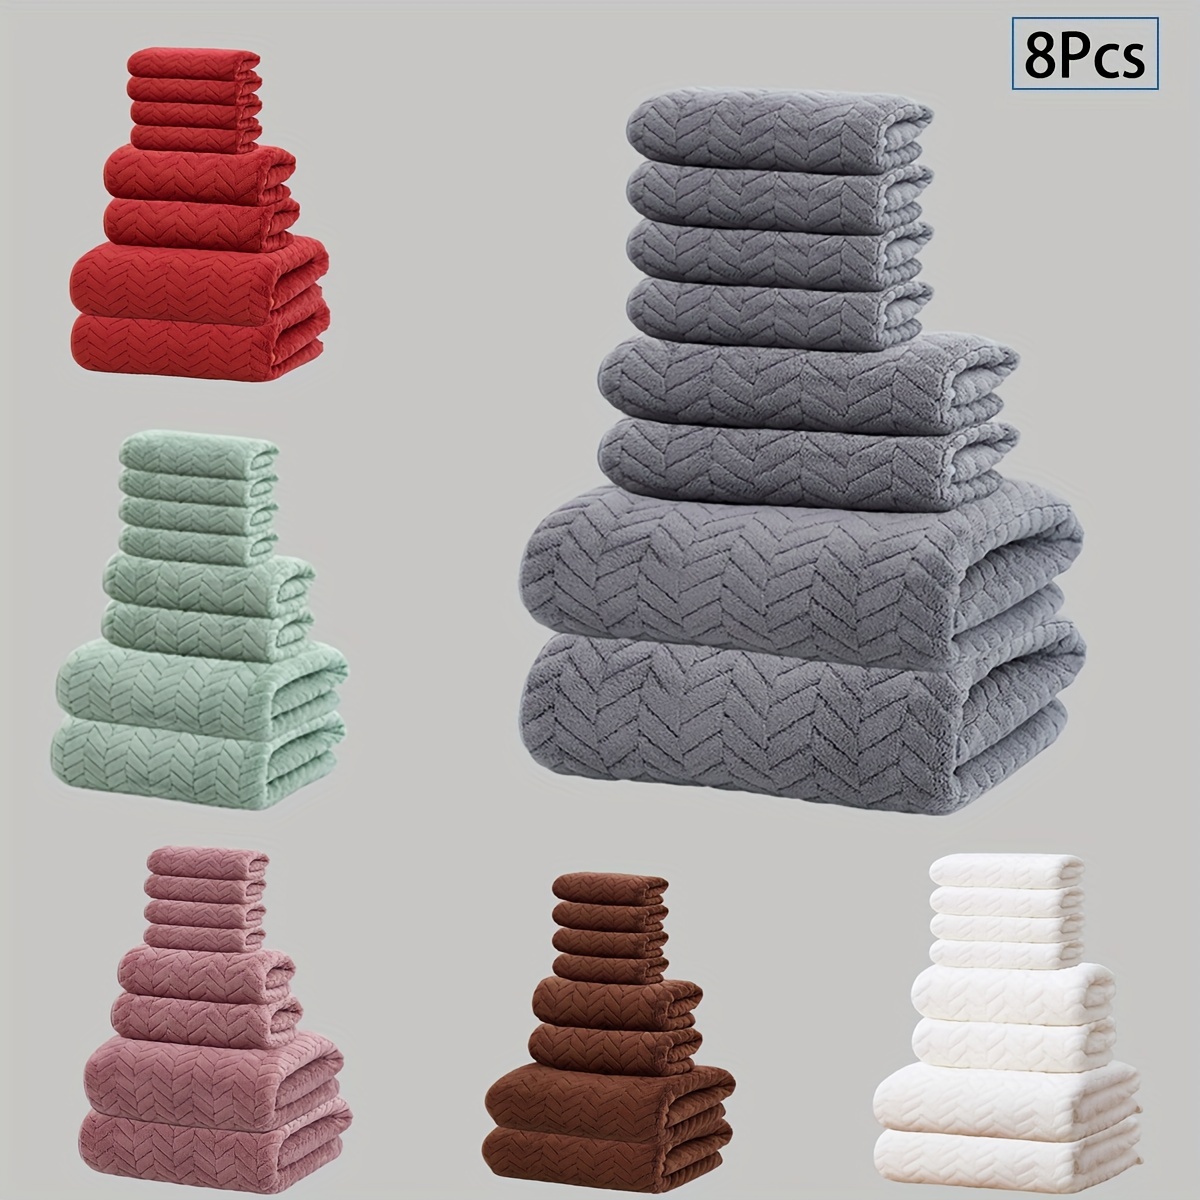 

8pcs Coral Fleece Towel Set, 4 Washcloths & 2 Hand Towels & 2 Bath Towels, Absorbent & Quick-drying Face Towel, Super & Soft & Thickened Bathing Towel, For Home Bathroom, Ideal Bathroom Supplies